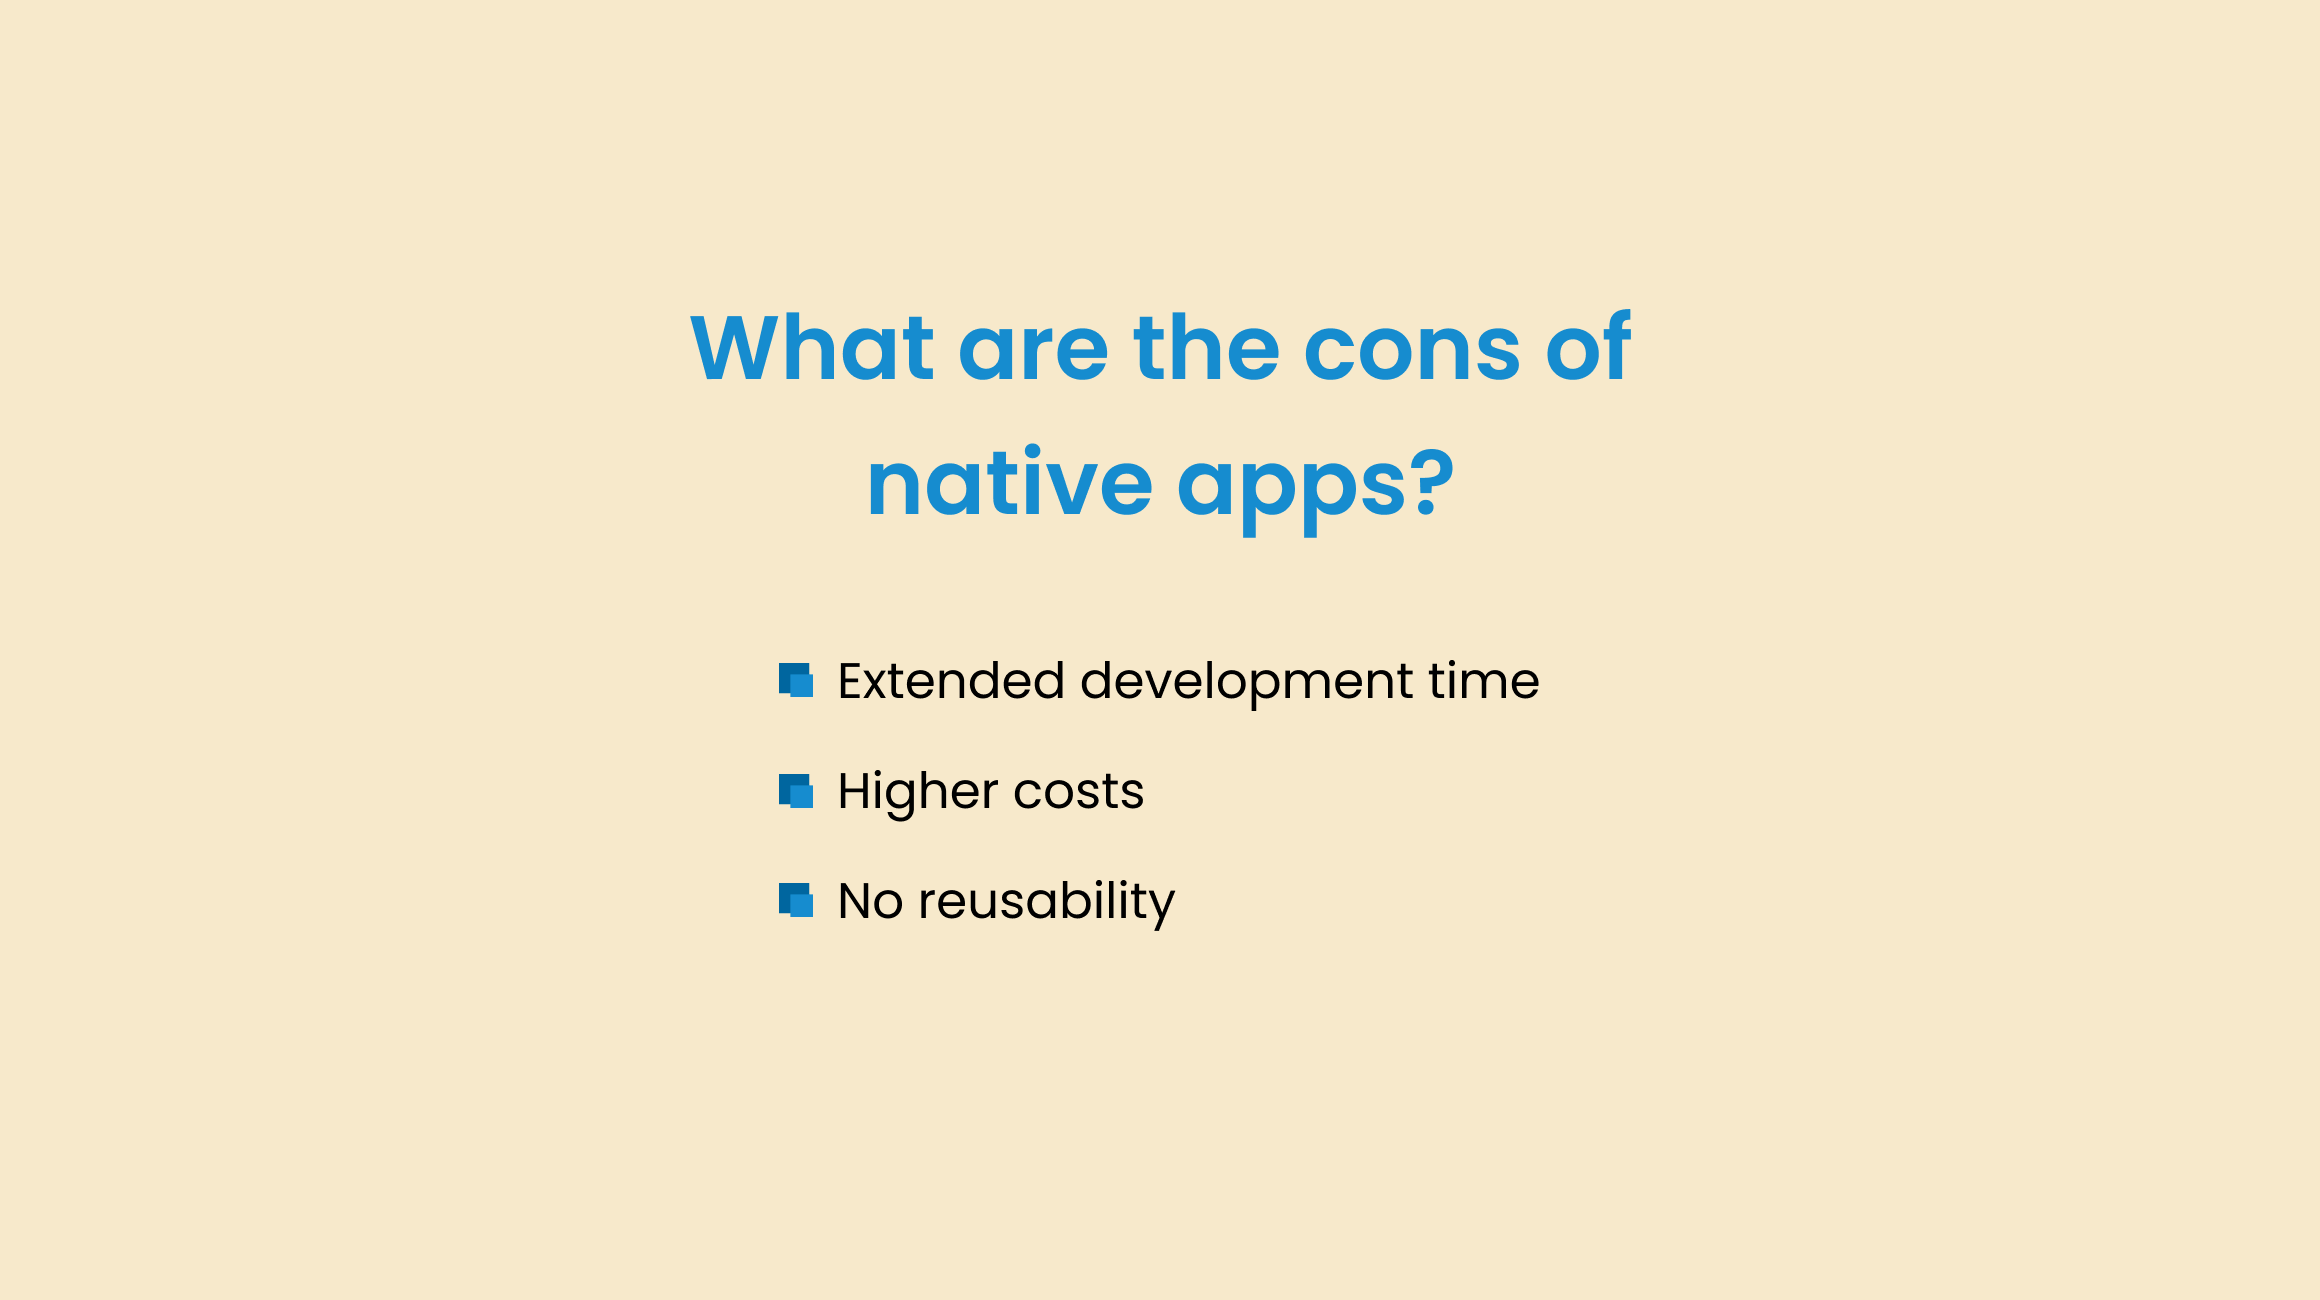 What are the cons of native apps